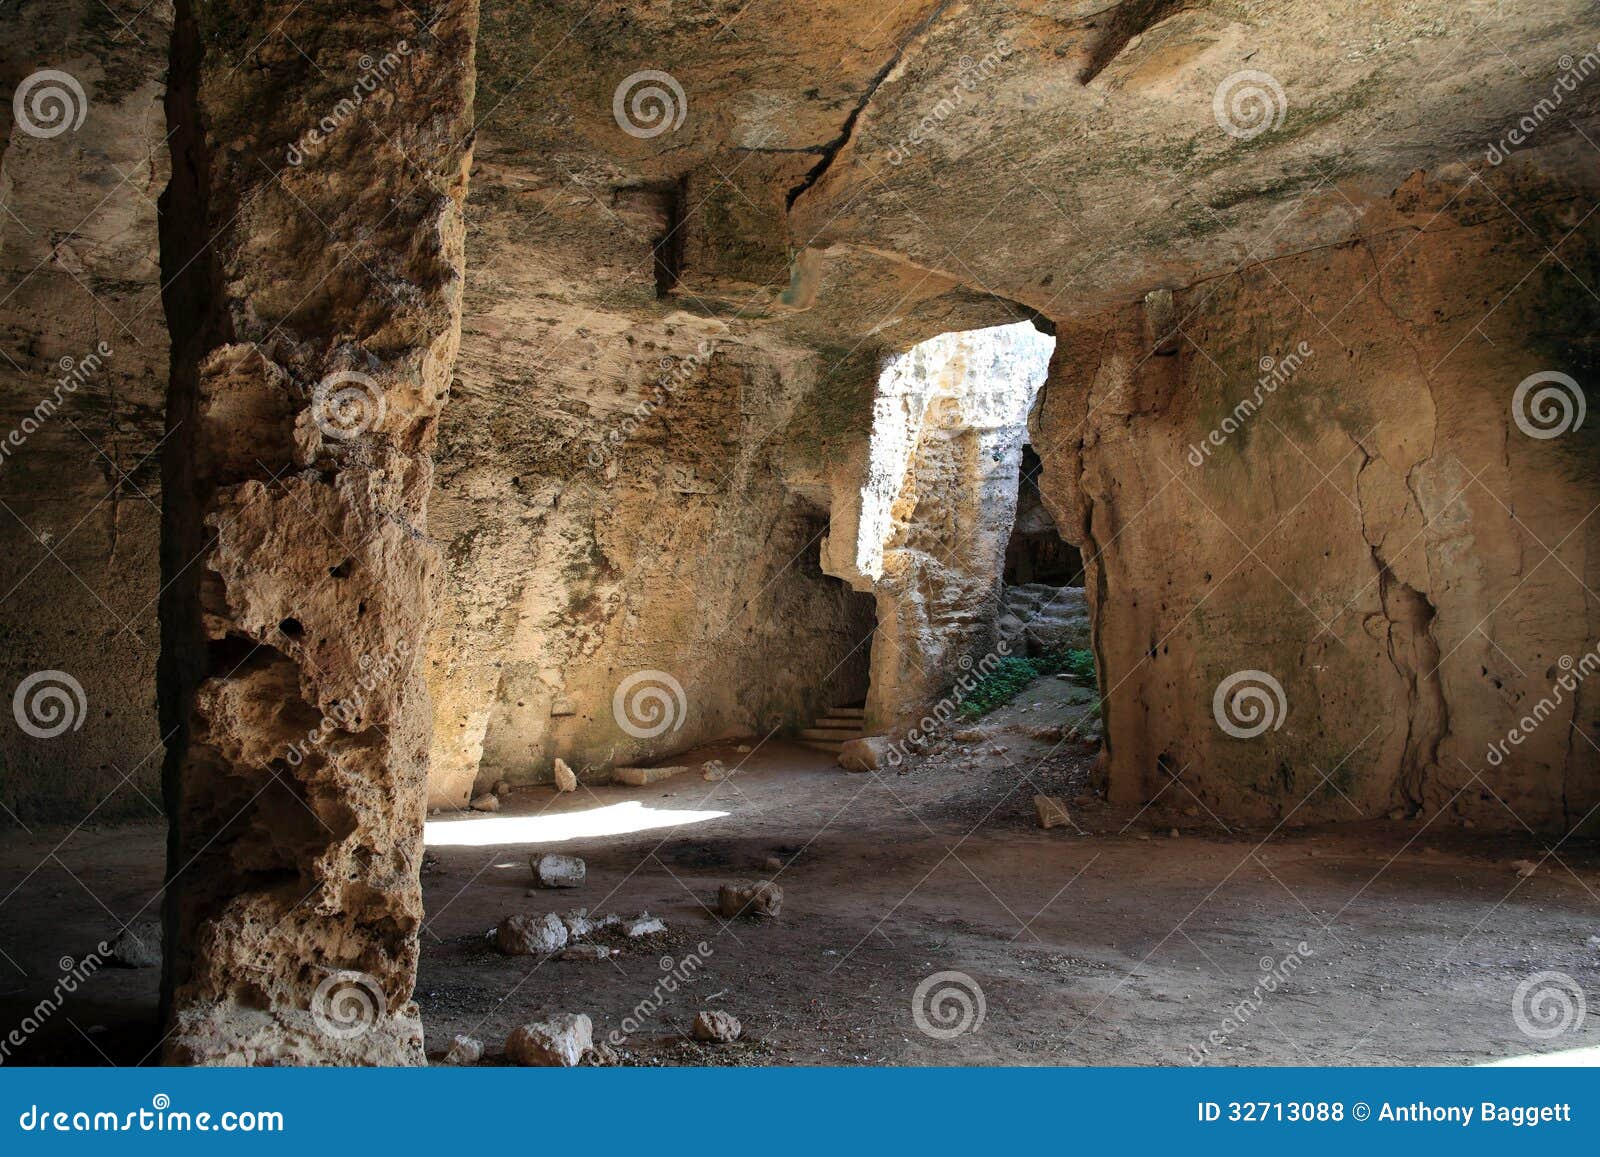 christian catacombs, paphos, cyprus